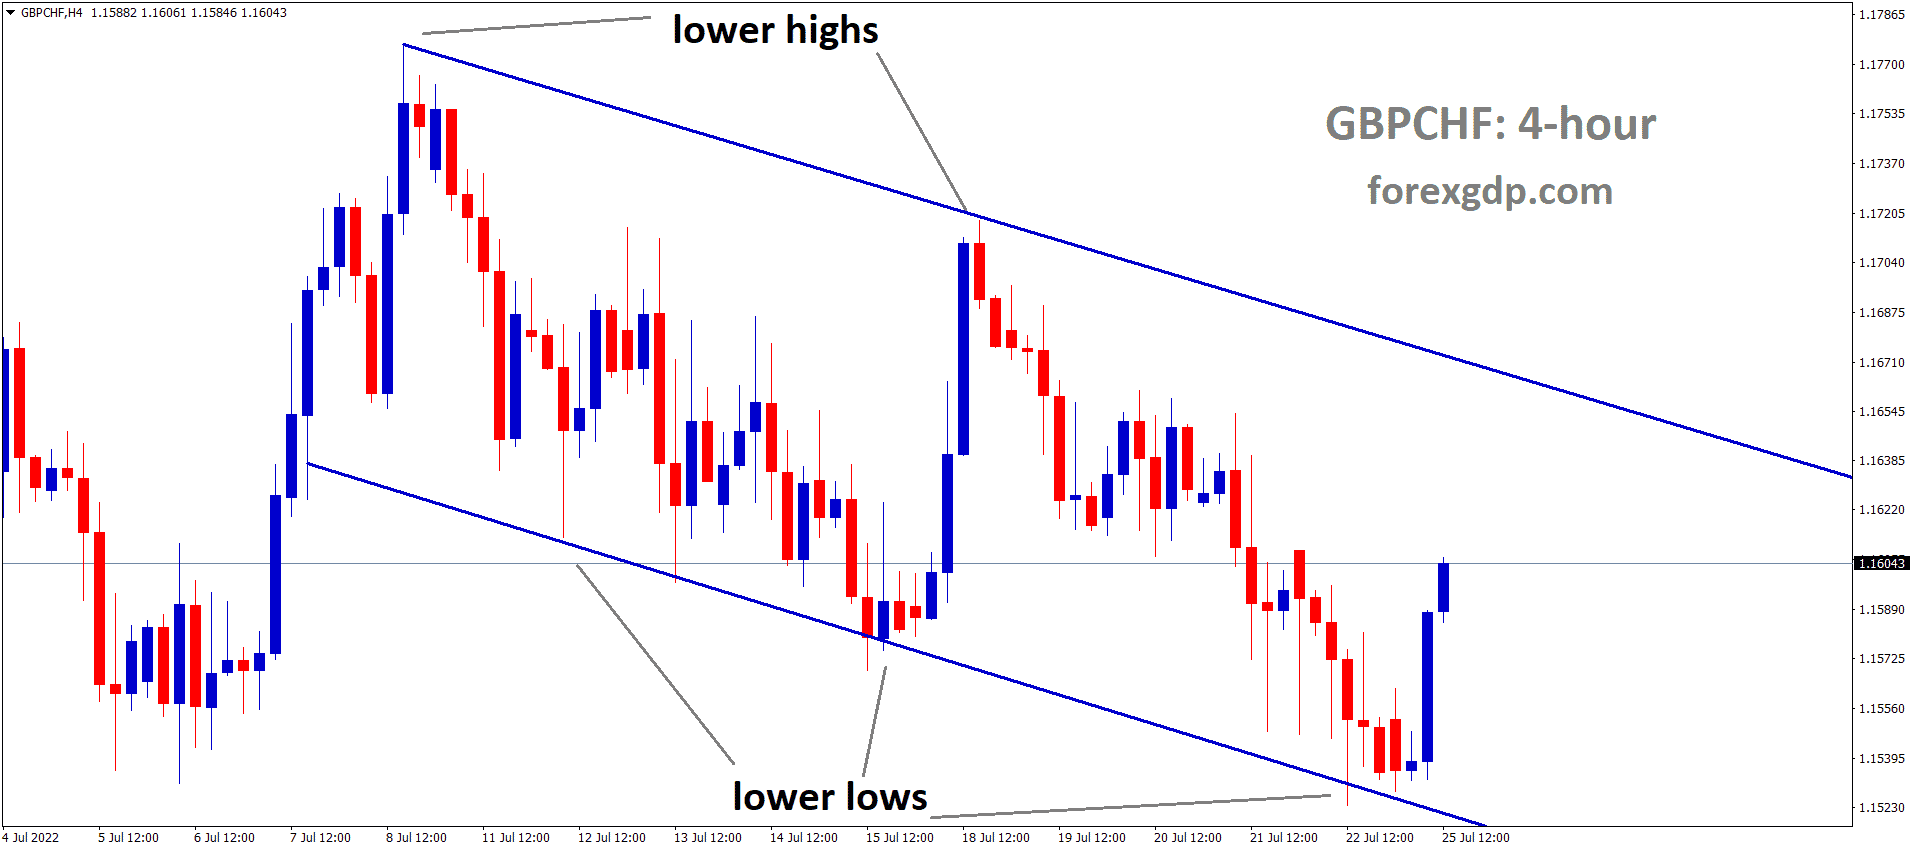 GBPCHF is moving in the Descending channel and the Market has rebounded from the Lower low area of the channel